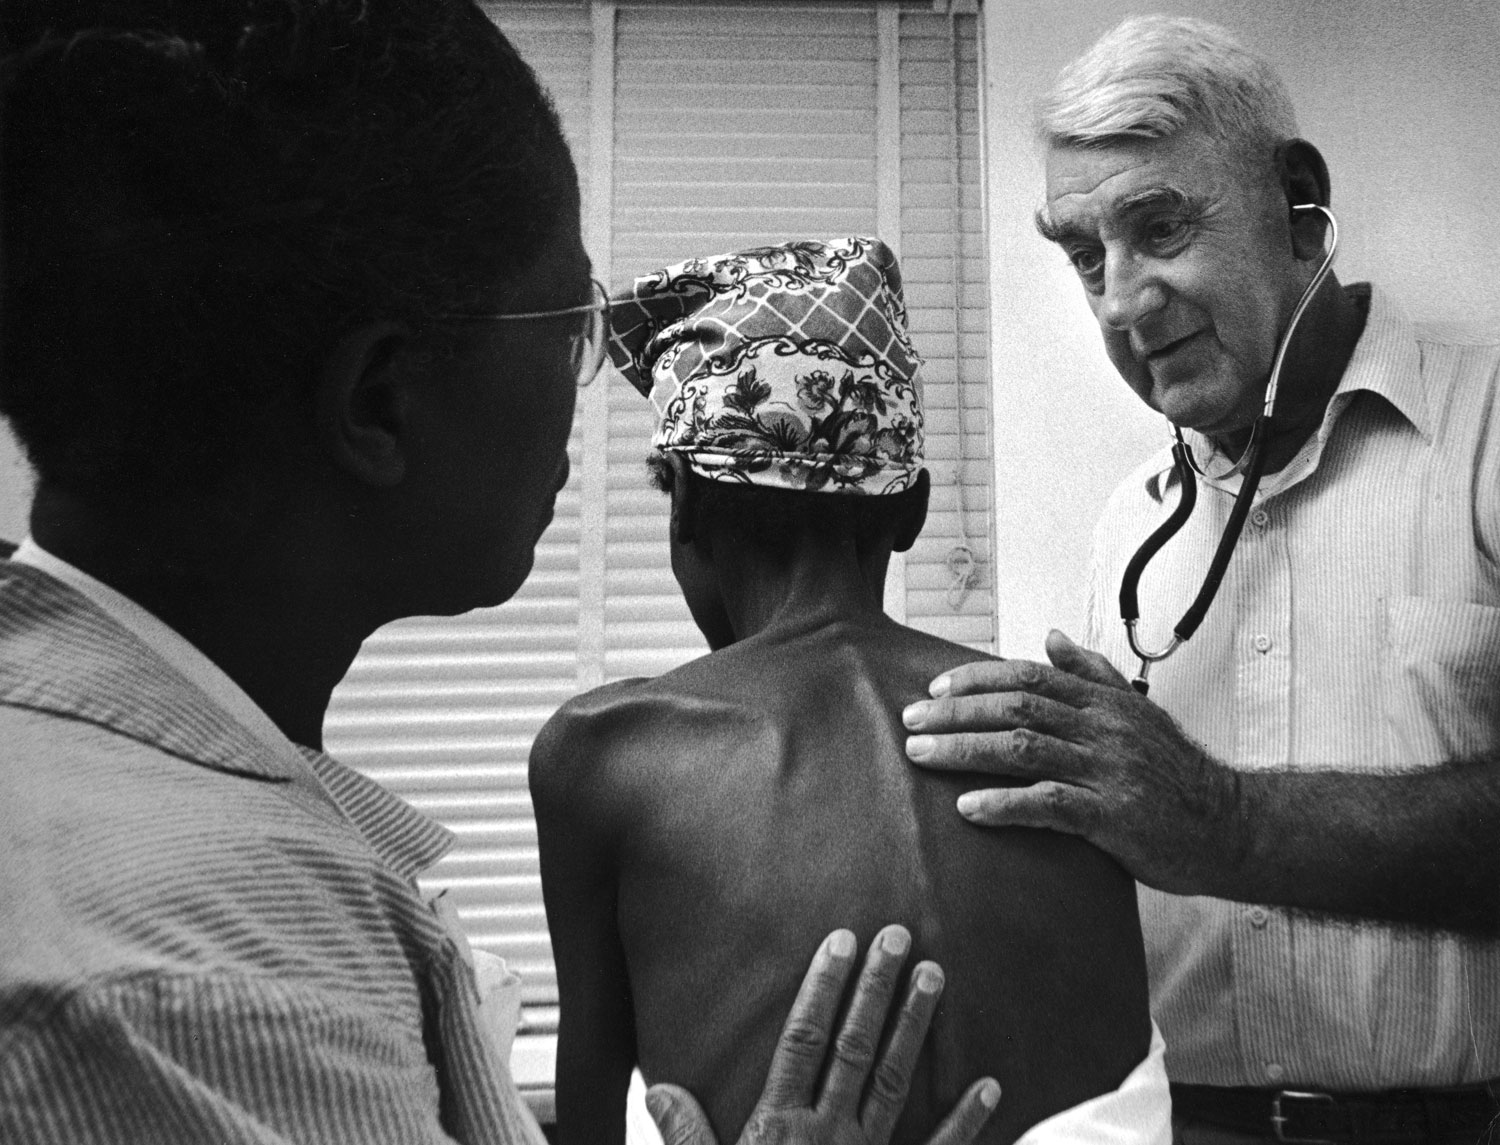 Caption from LIFE. Dr. W. K. Fishburne, head of the Berkeley County health department, examines a patient brought to hospital by Maude.